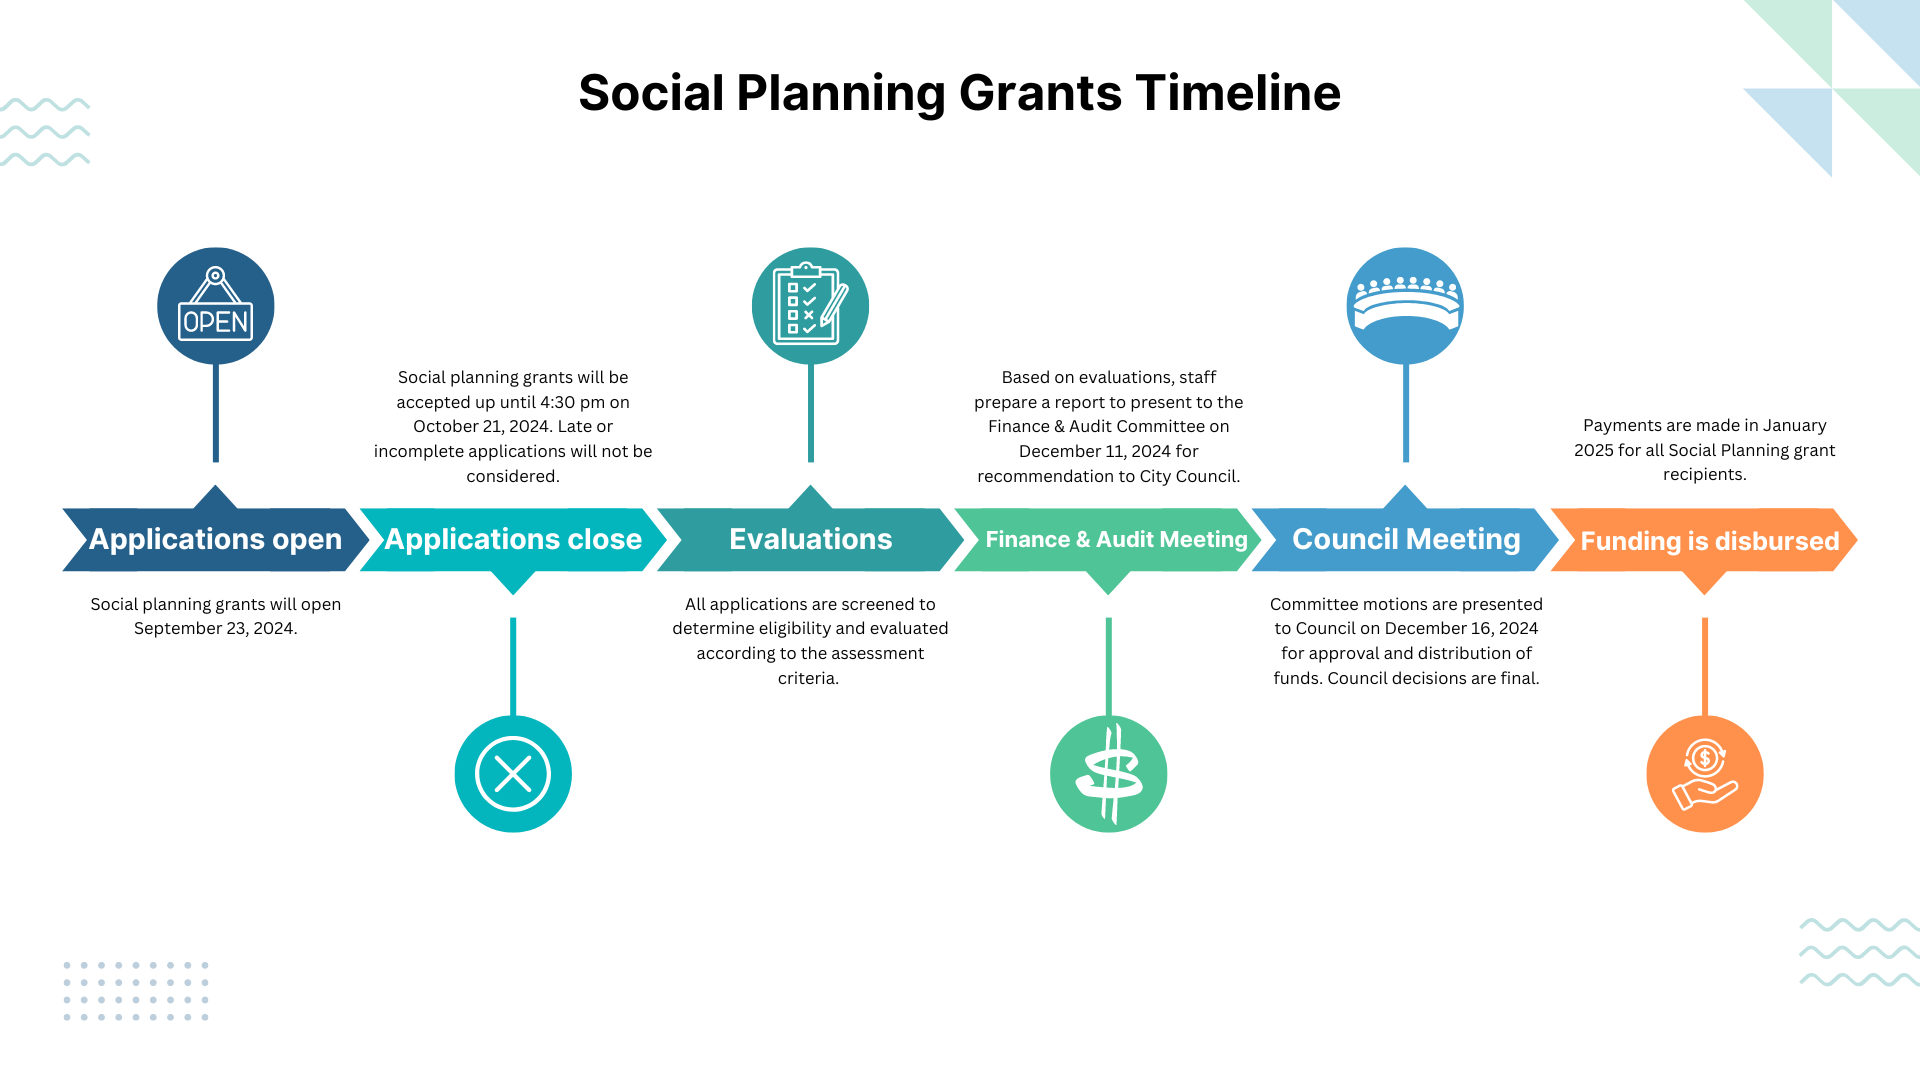 Social Planning grants timeline for 2024 - applications open September 23, 2024 - applications close October 21, 2024 - evaluation period - finance and audit meeting on December 11, 2024 - Council meeting December 16, 2024 - Funding is disbursed Jan 2025 